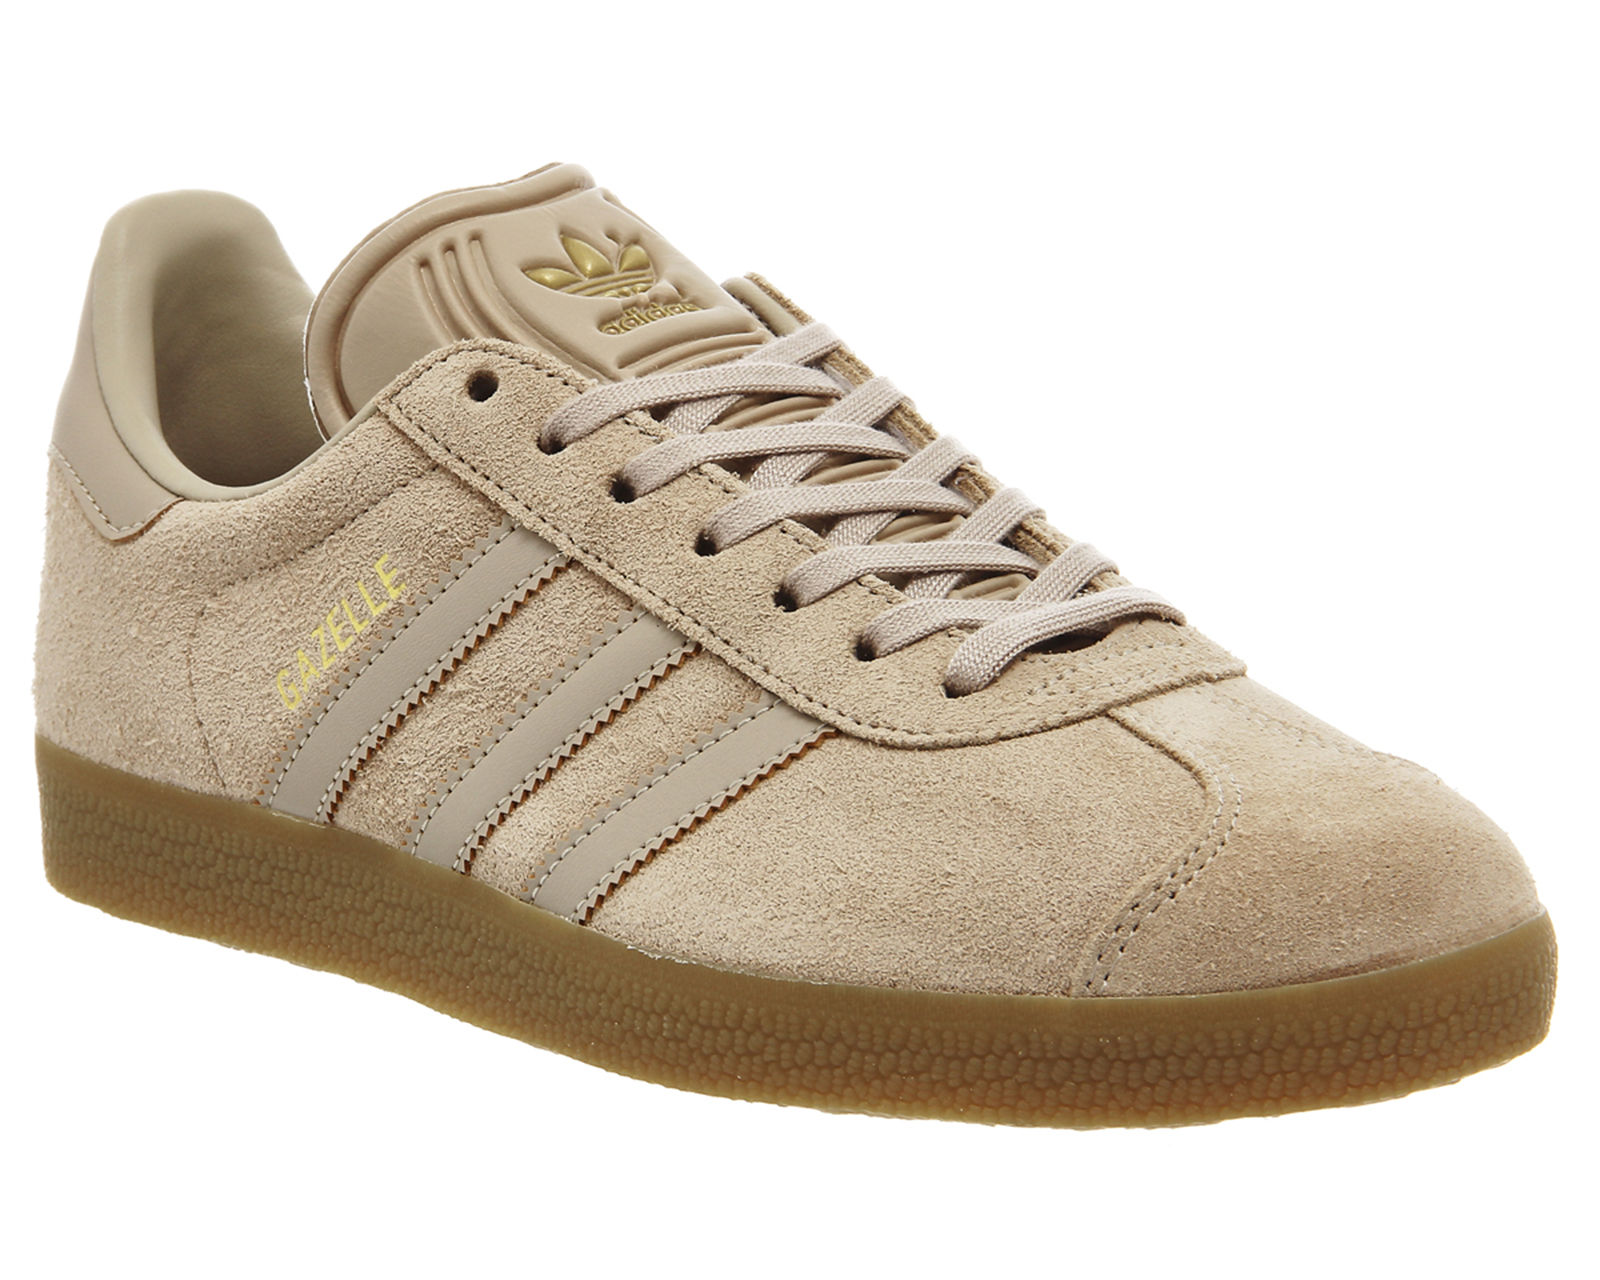 Adidas Gazelle Clay Brown Gum - His trainers